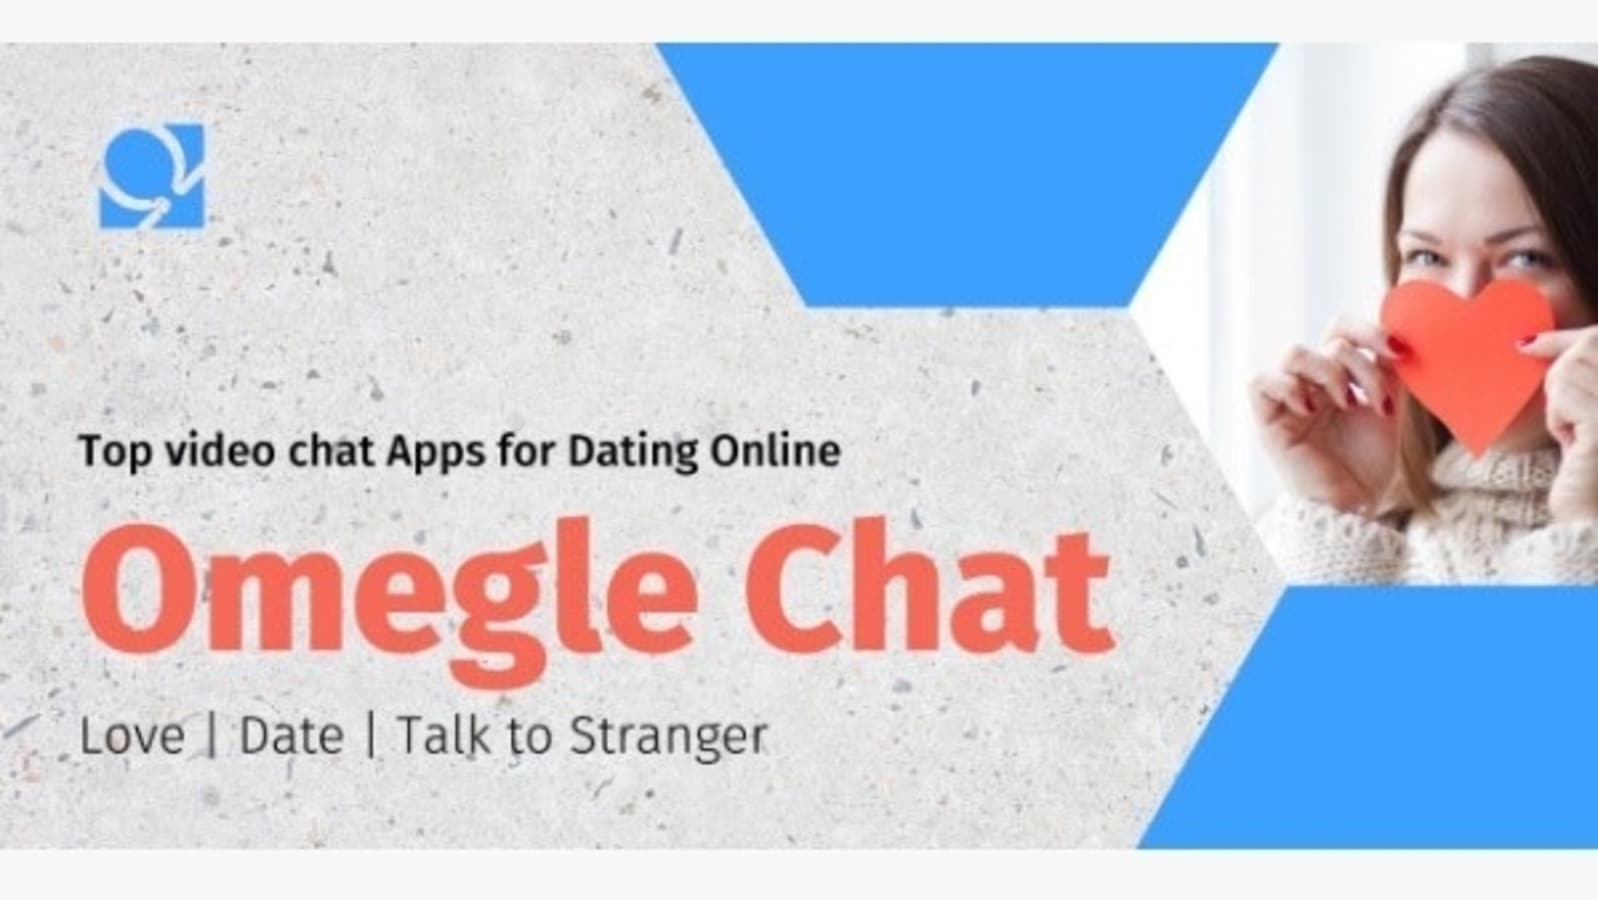 dating-free online chat and meet strangers